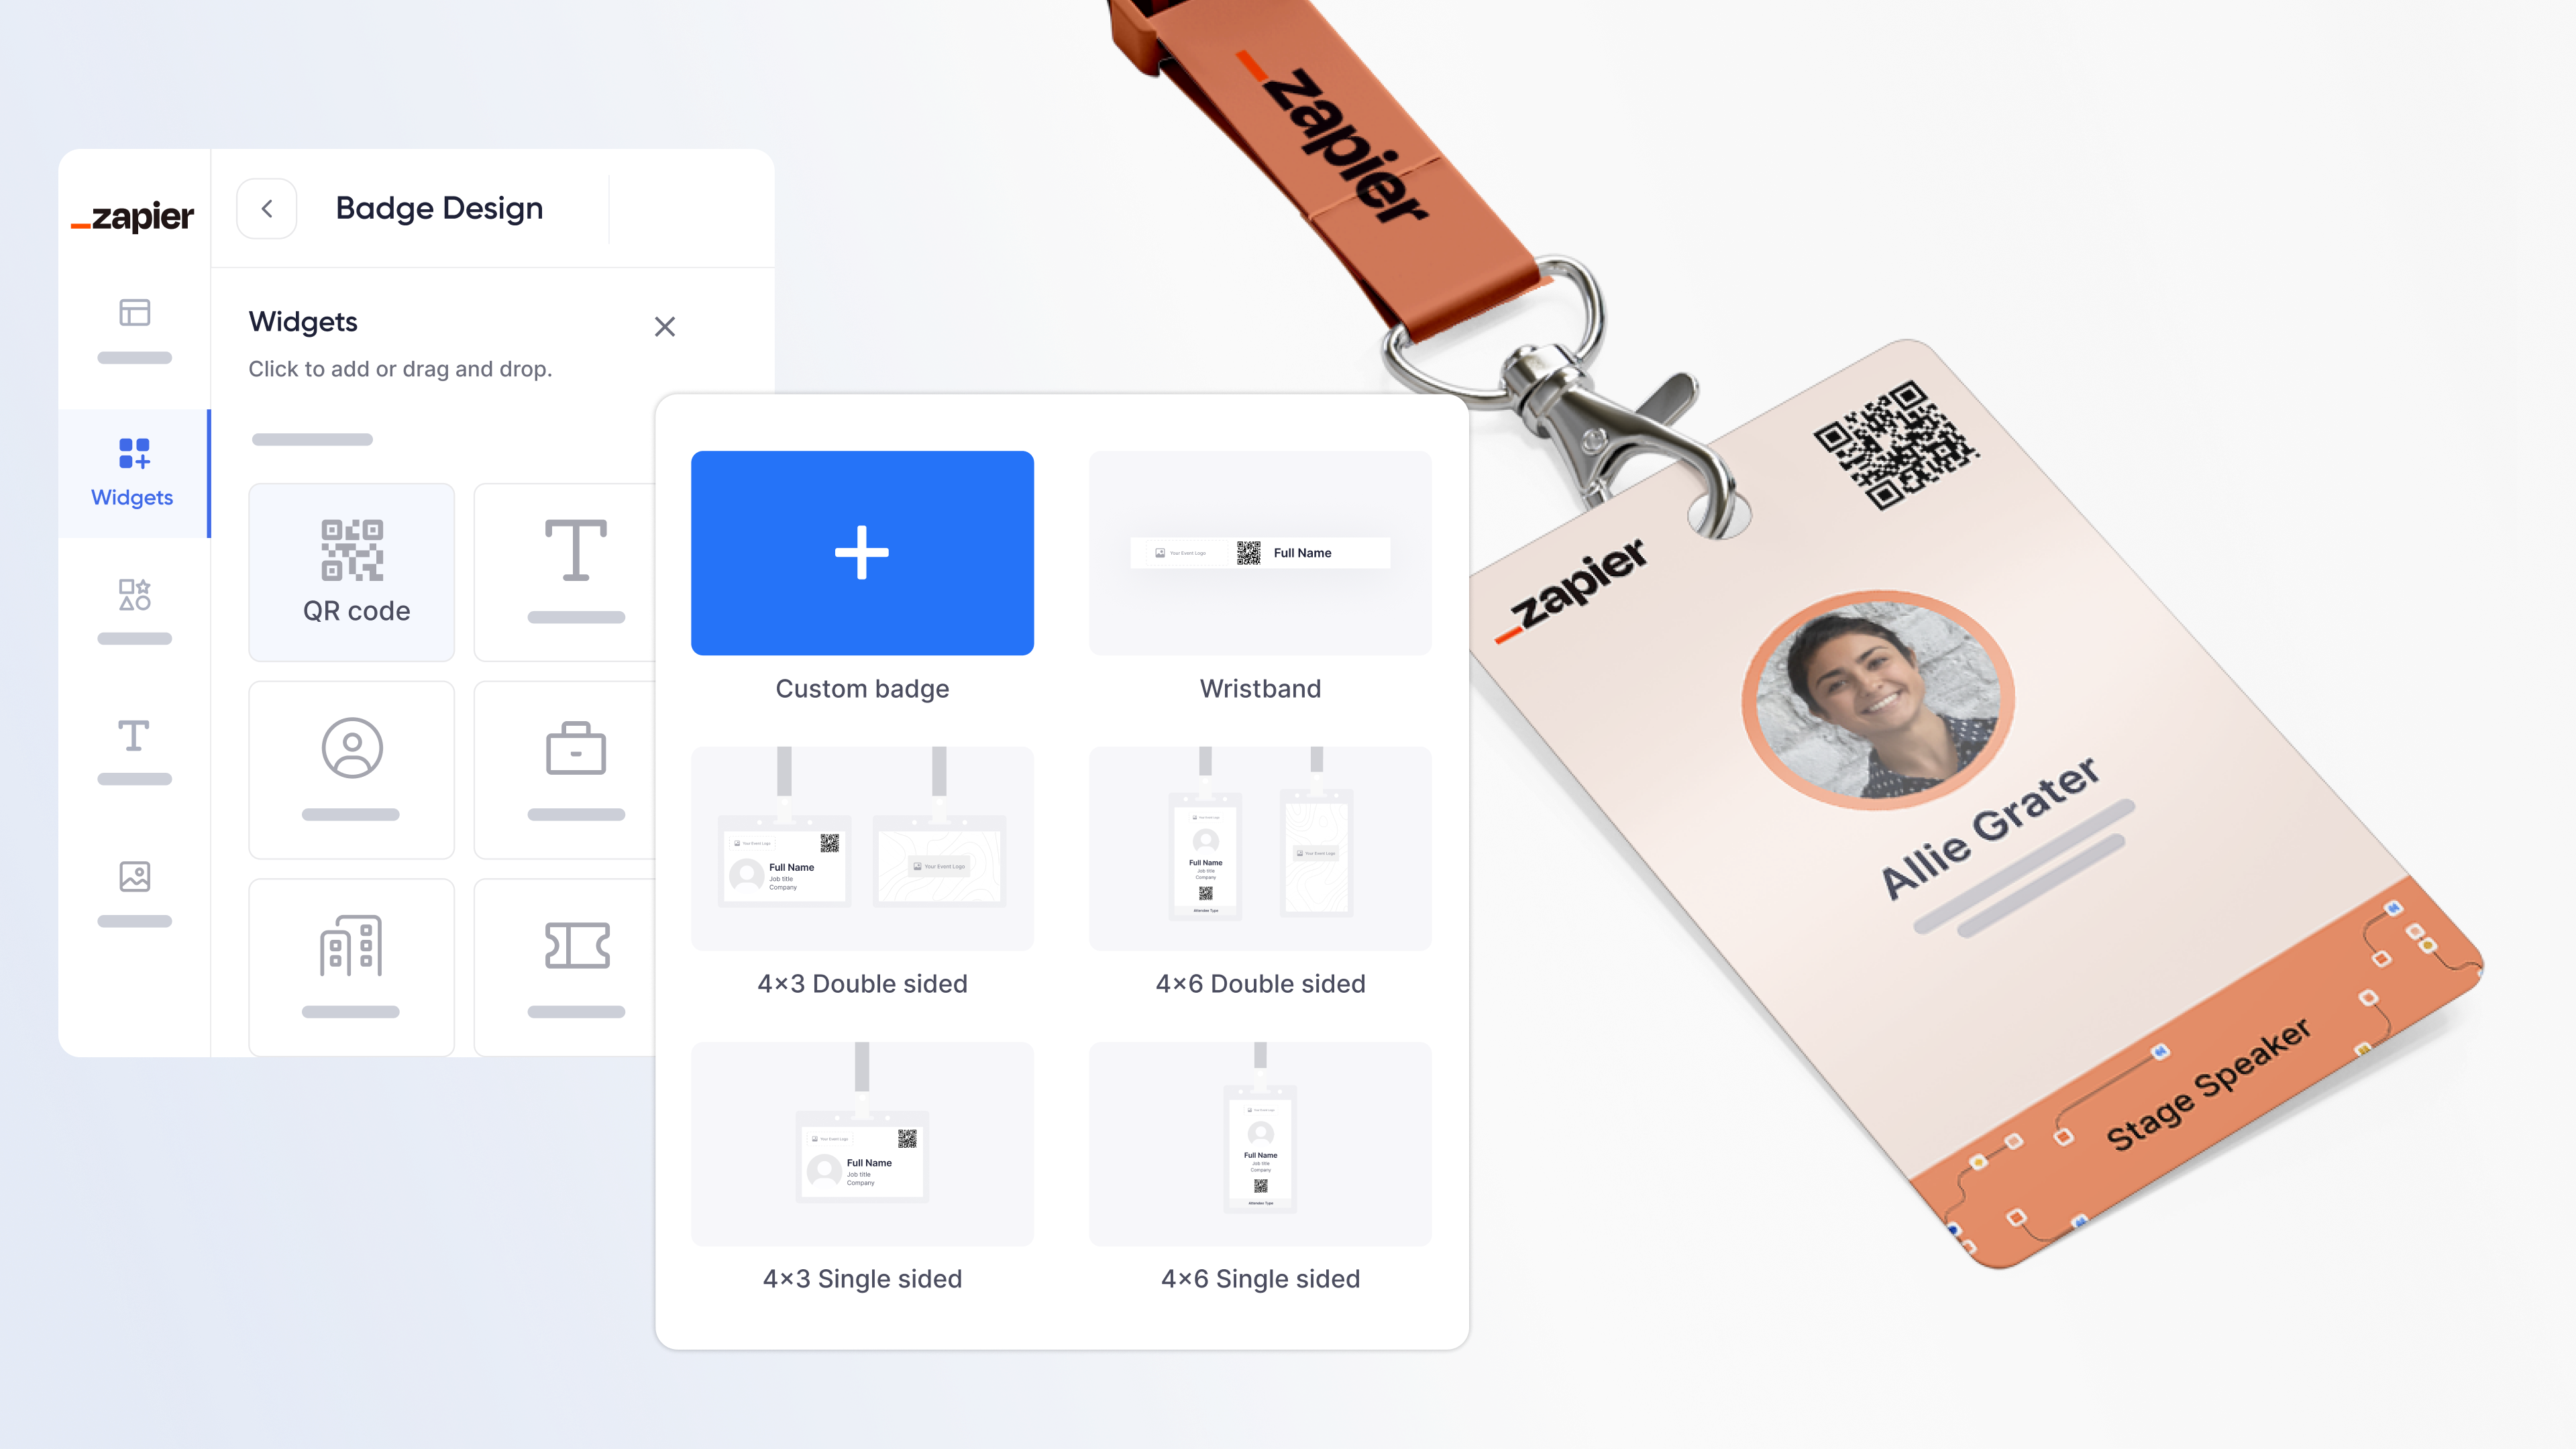 Create professional badge designs with ease using our drag-n-drop designer. No design skills needed! Print badges pre-event or on-demand at check-in.